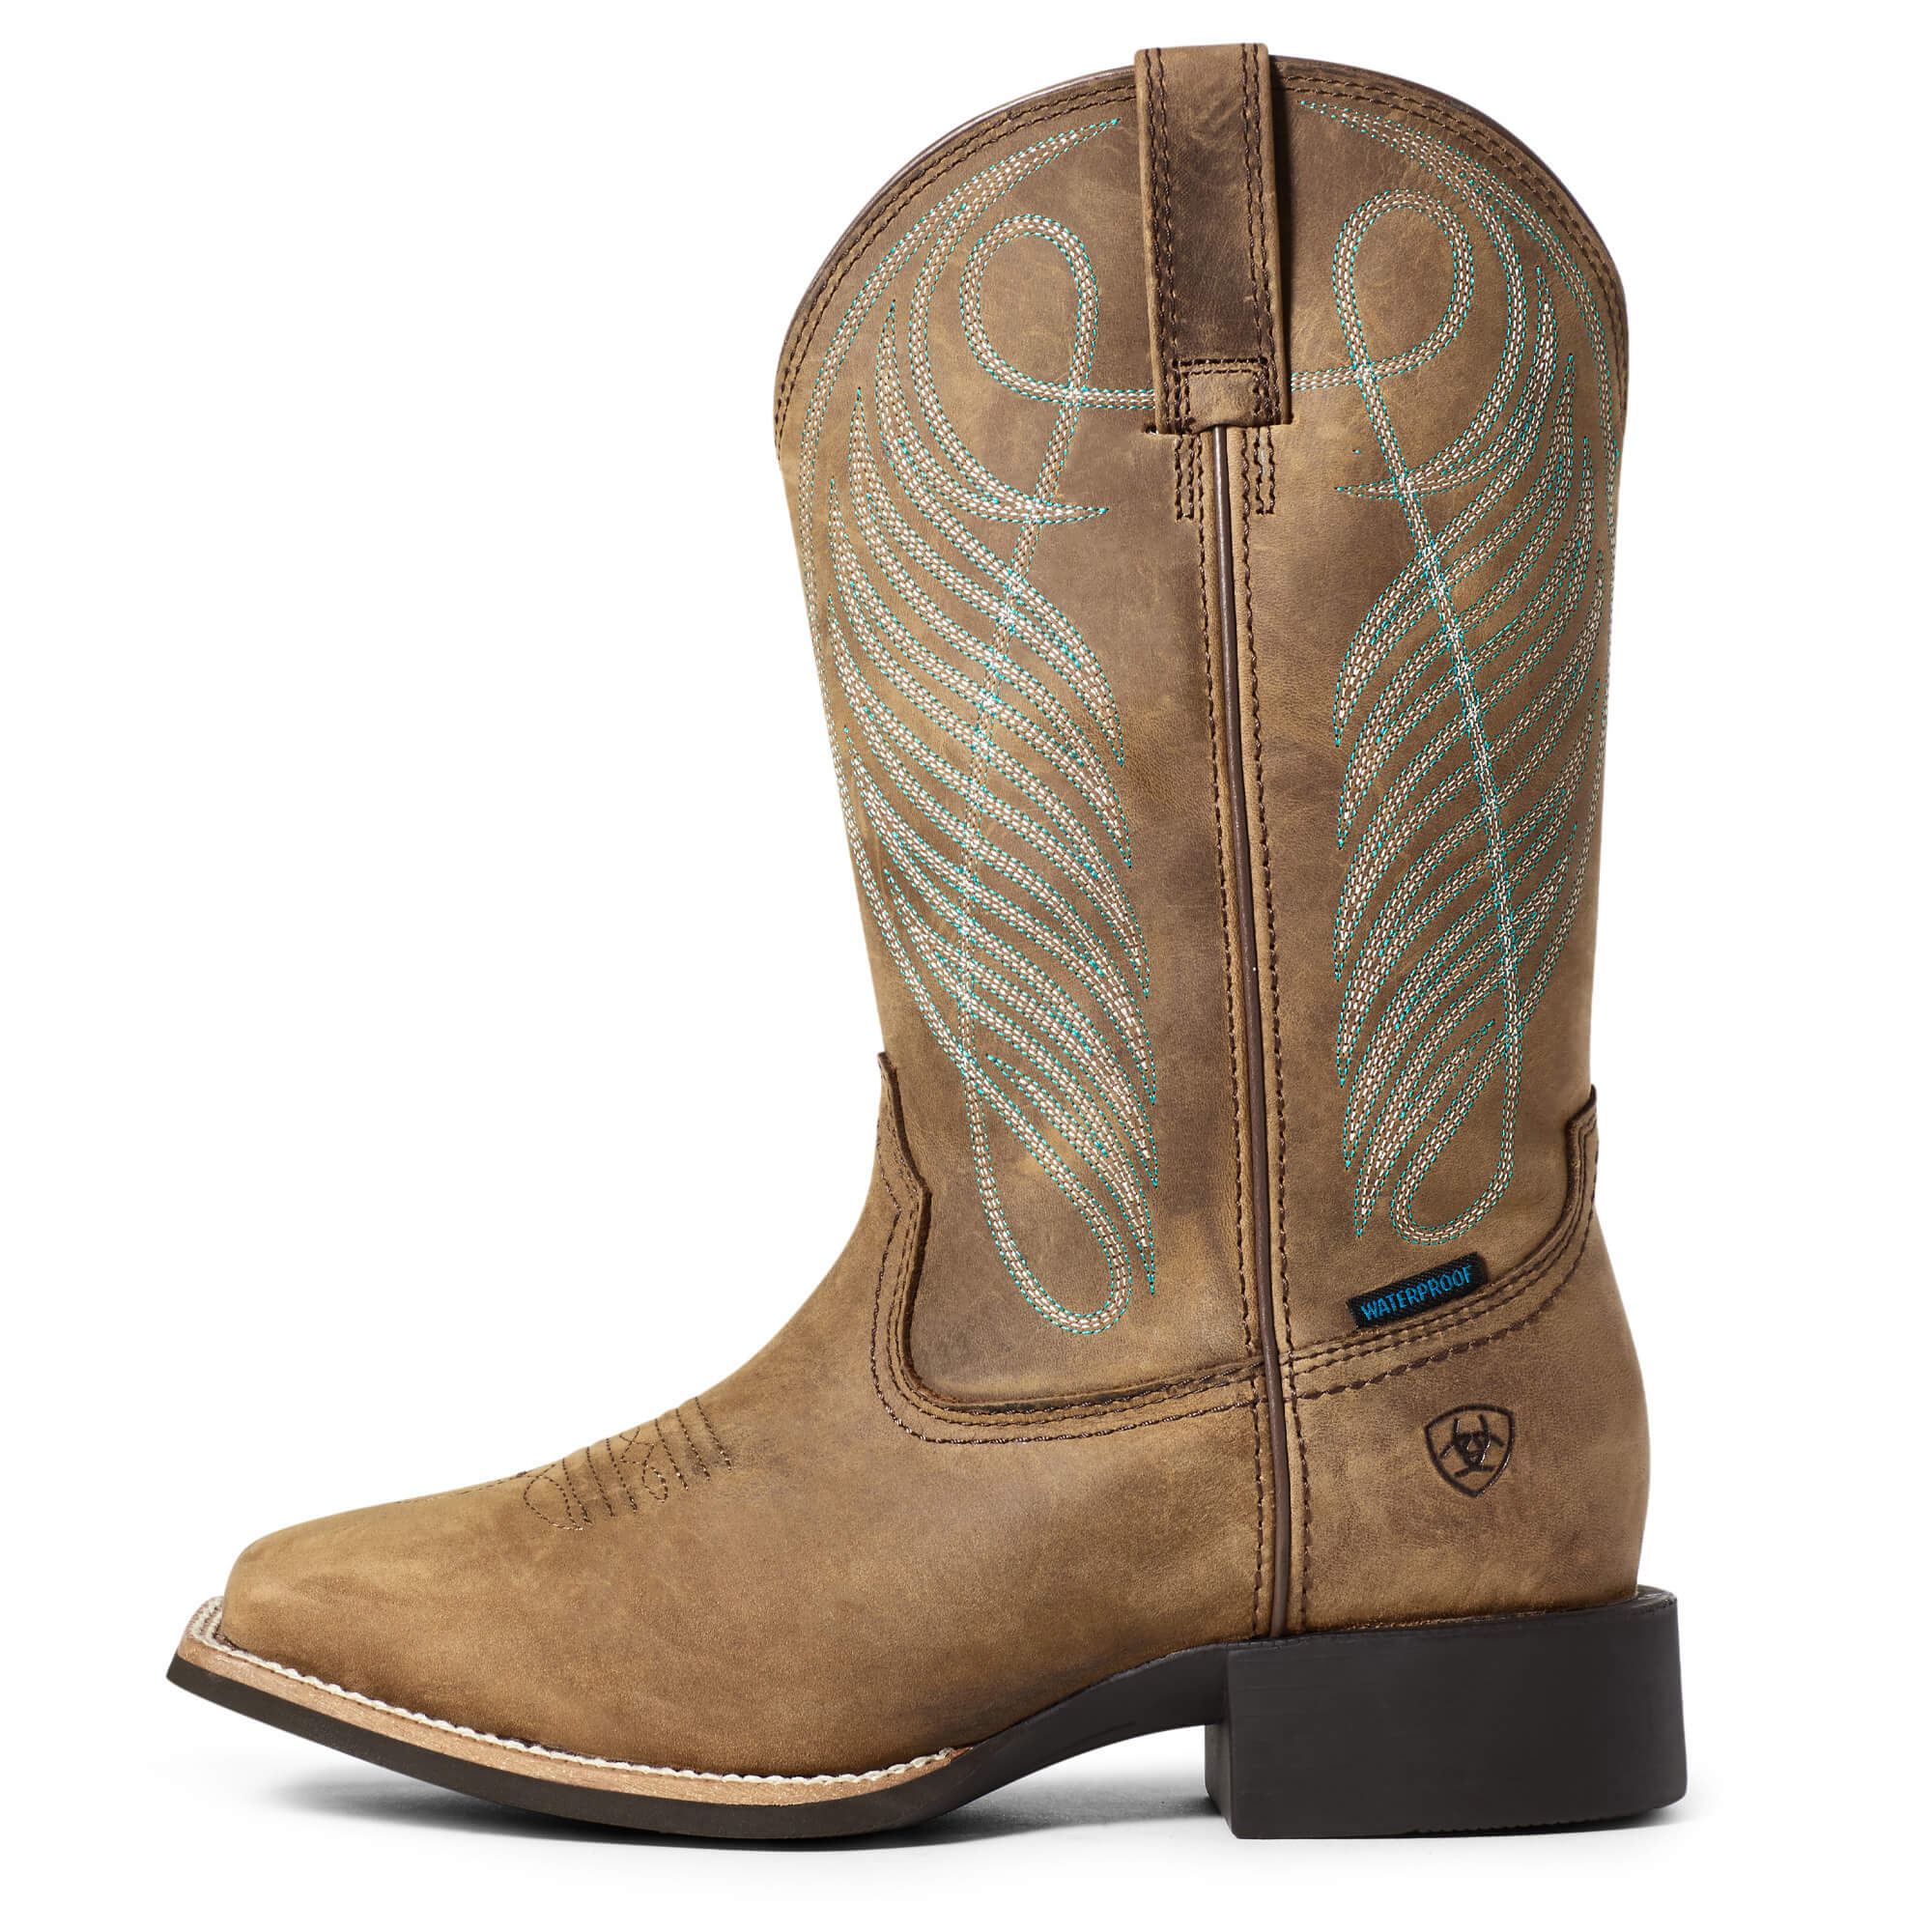 Ariat Women's Round Up Wide Square Toe Waterproof Western Boot